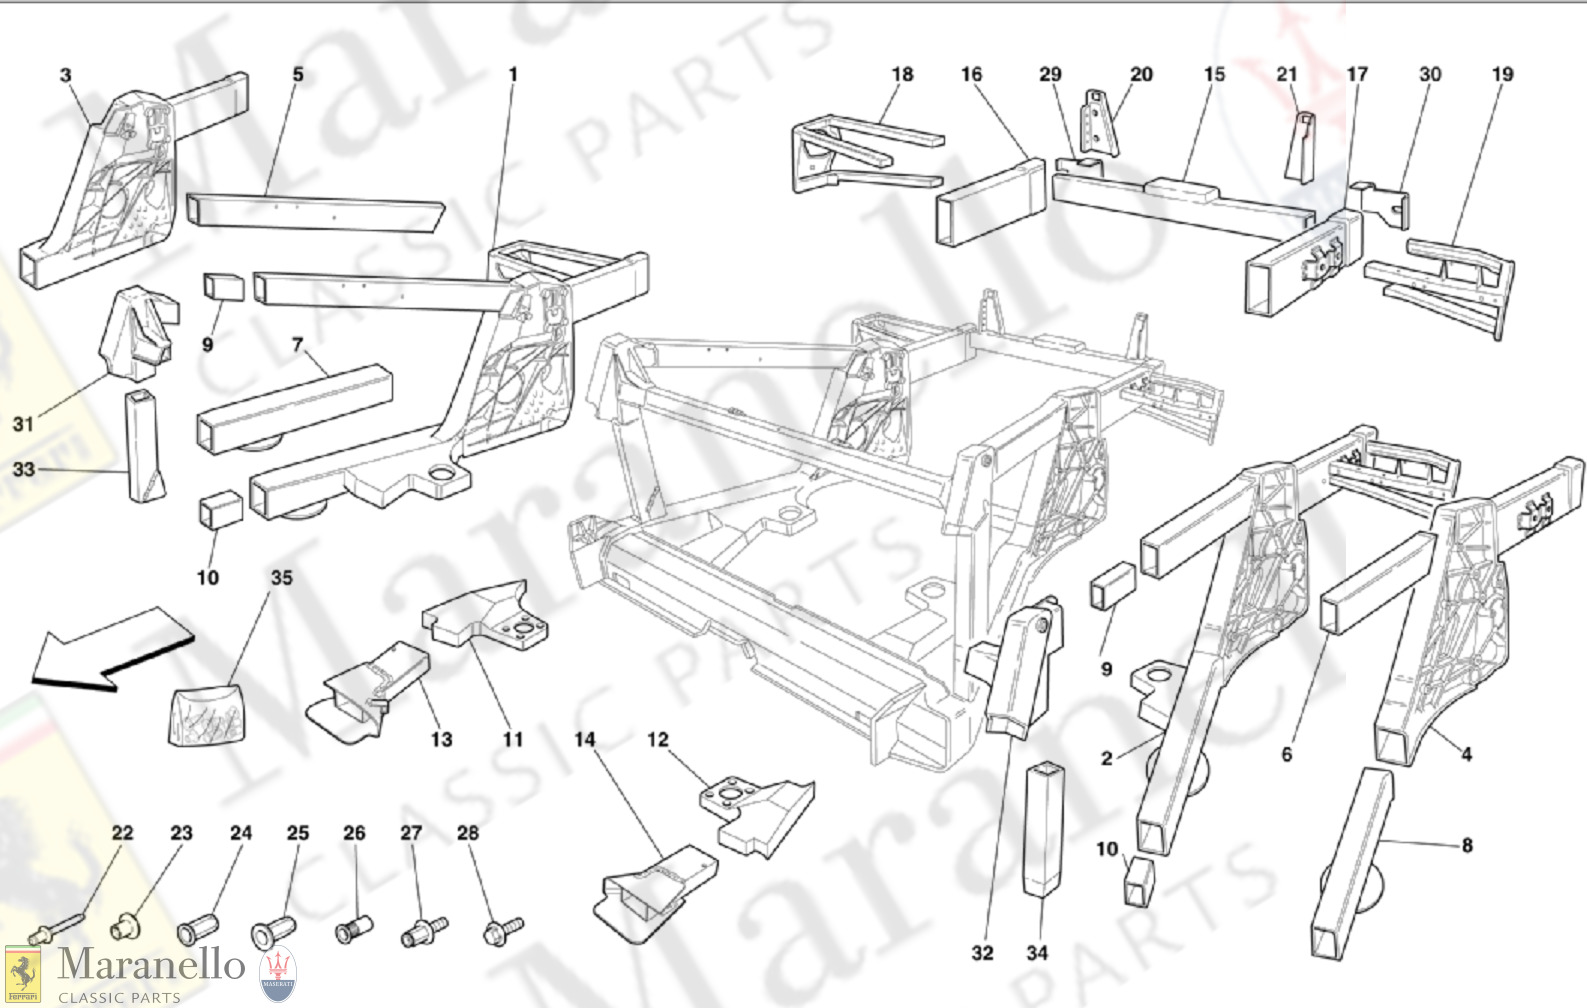 105 - Frame - Rear Elements Sub-Groups